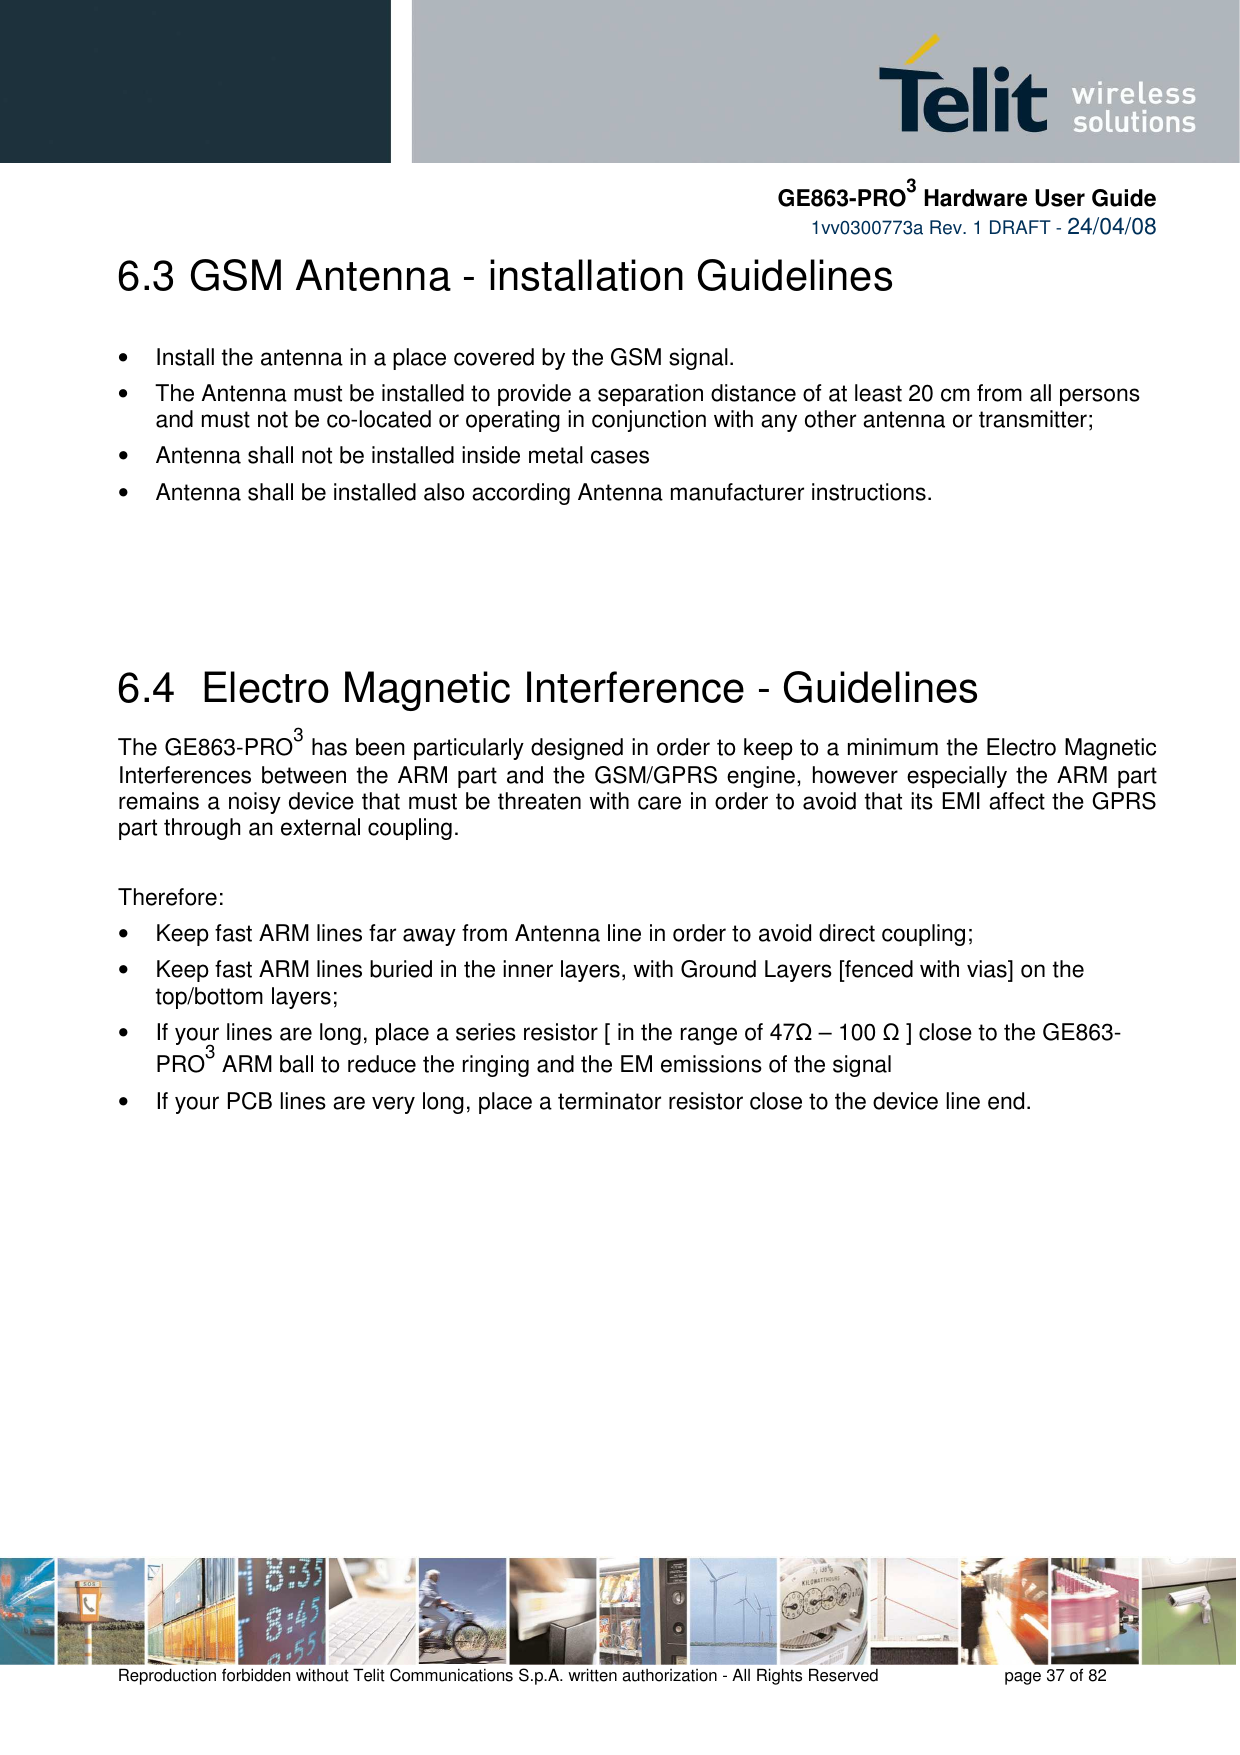     GE863-PRO3 Hardware User Guide  1vv0300773a Rev. 1 DRAFT - 24/04/08    Reproduction forbidden without Telit Communications S.p.A. written authorization - All Rights Reserved    page 37 of 82  6.3  GSM Antenna - installation Guidelines  •  Install the antenna in a place covered by the GSM signal. •  The Antenna must be installed to provide a separation distance of at least 20 cm from all persons and must not be co-located or operating in conjunction with any other antenna or transmitter; •  Antenna shall not be installed inside metal cases  •  Antenna shall be installed also according Antenna manufacturer instructions.    6.4  Electro Magnetic Interference - Guidelines The GE863-PRO3 has been particularly designed in order to keep to a minimum the Electro Magnetic Interferences between the ARM part and the GSM/GPRS engine, however especially the ARM part remains a noisy device that must be threaten with care in order to avoid that its EMI affect the GPRS part through an external coupling.  Therefore: •  Keep fast ARM lines far away from Antenna line in order to avoid direct coupling; •  Keep fast ARM lines buried in the inner layers, with Ground Layers [fenced with vias] on the top/bottom layers; •  If your lines are long, place a series resistor [ in the range of 47Ω – 100 Ω ] close to the GE863-PRO3 ARM ball to reduce the ringing and the EM emissions of the signal •  If your PCB lines are very long, place a terminator resistor close to the device line end.      